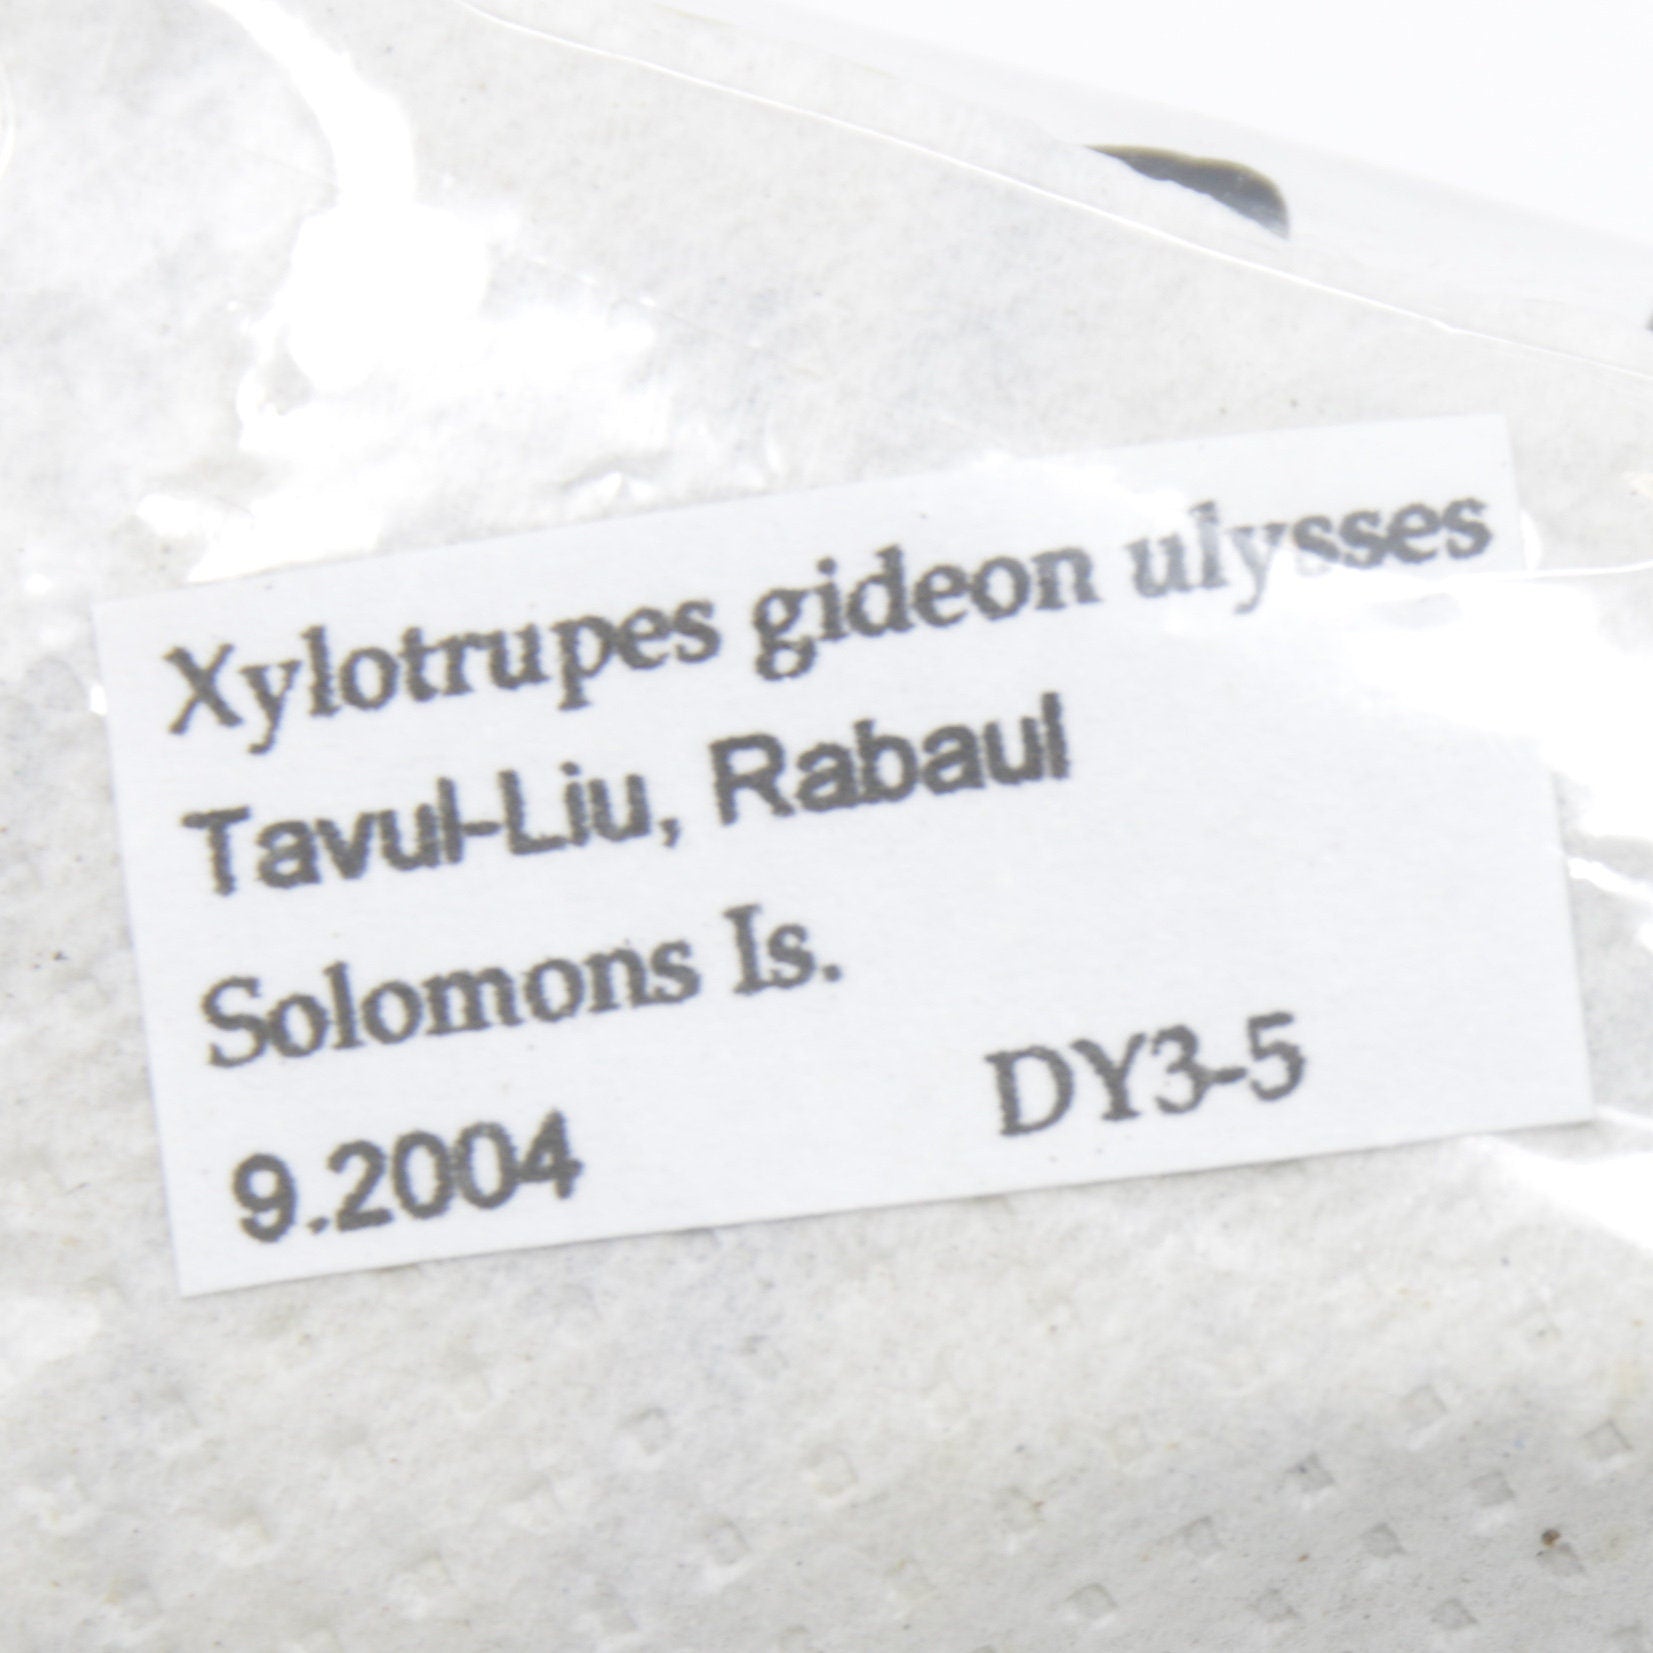 One (1) Xylotrupes gideon ulysses, Solomon Islands with Scientific Collection Data, A1 Quality